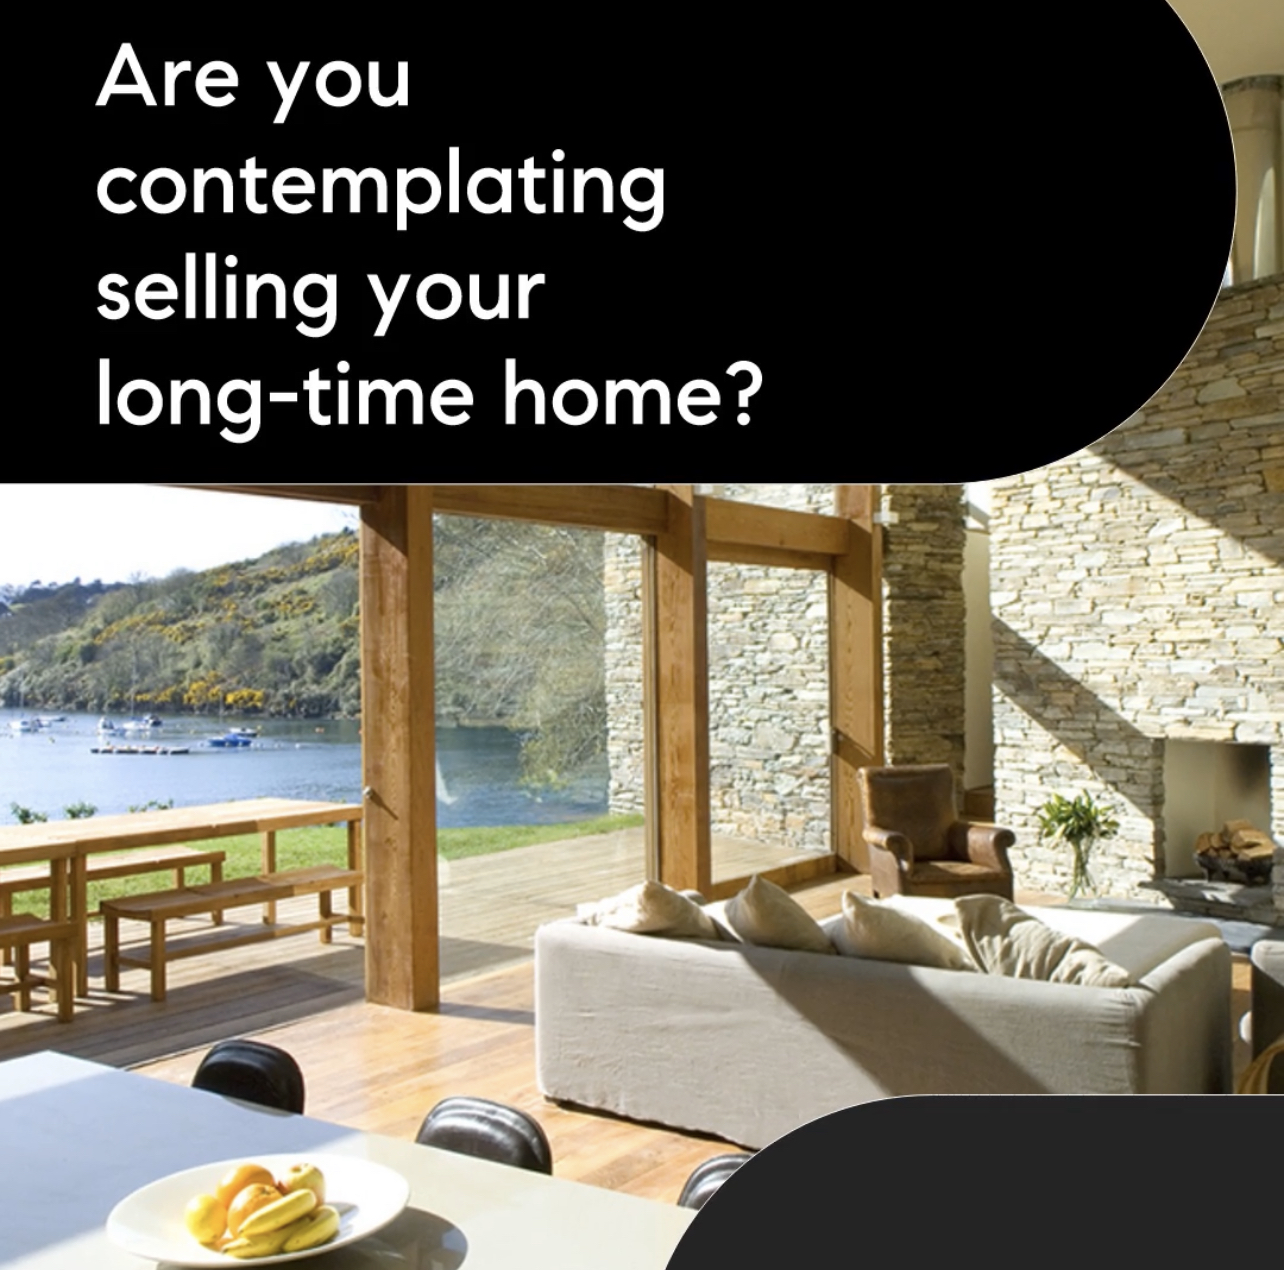 Are You Contemplating Selling Your Home? I Can Help. Let’s Chat!